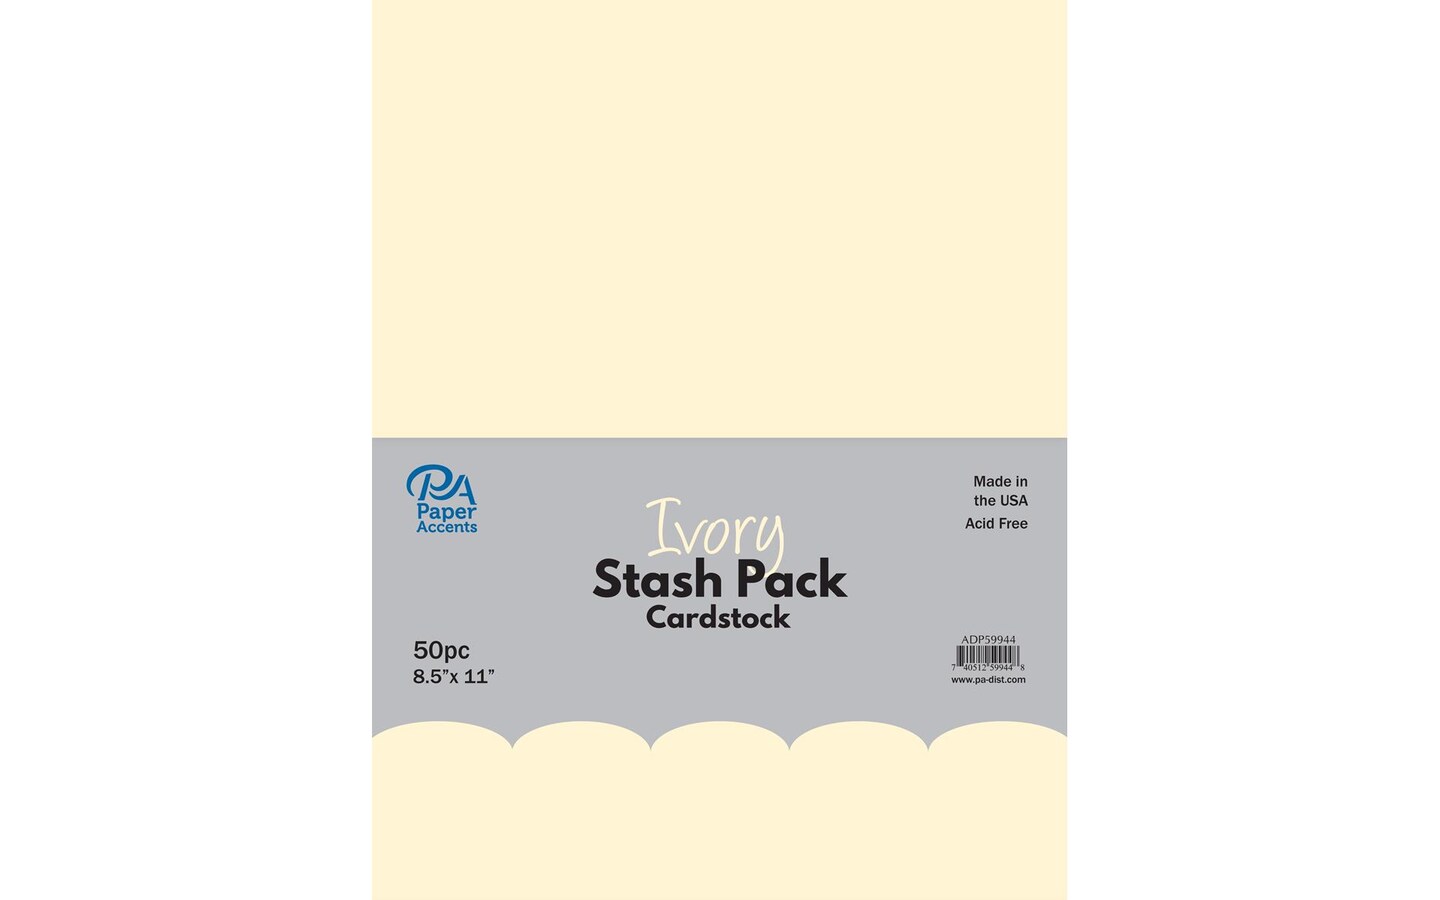 PA Paper Accents Stash Pack Cardstock Pack 8.5